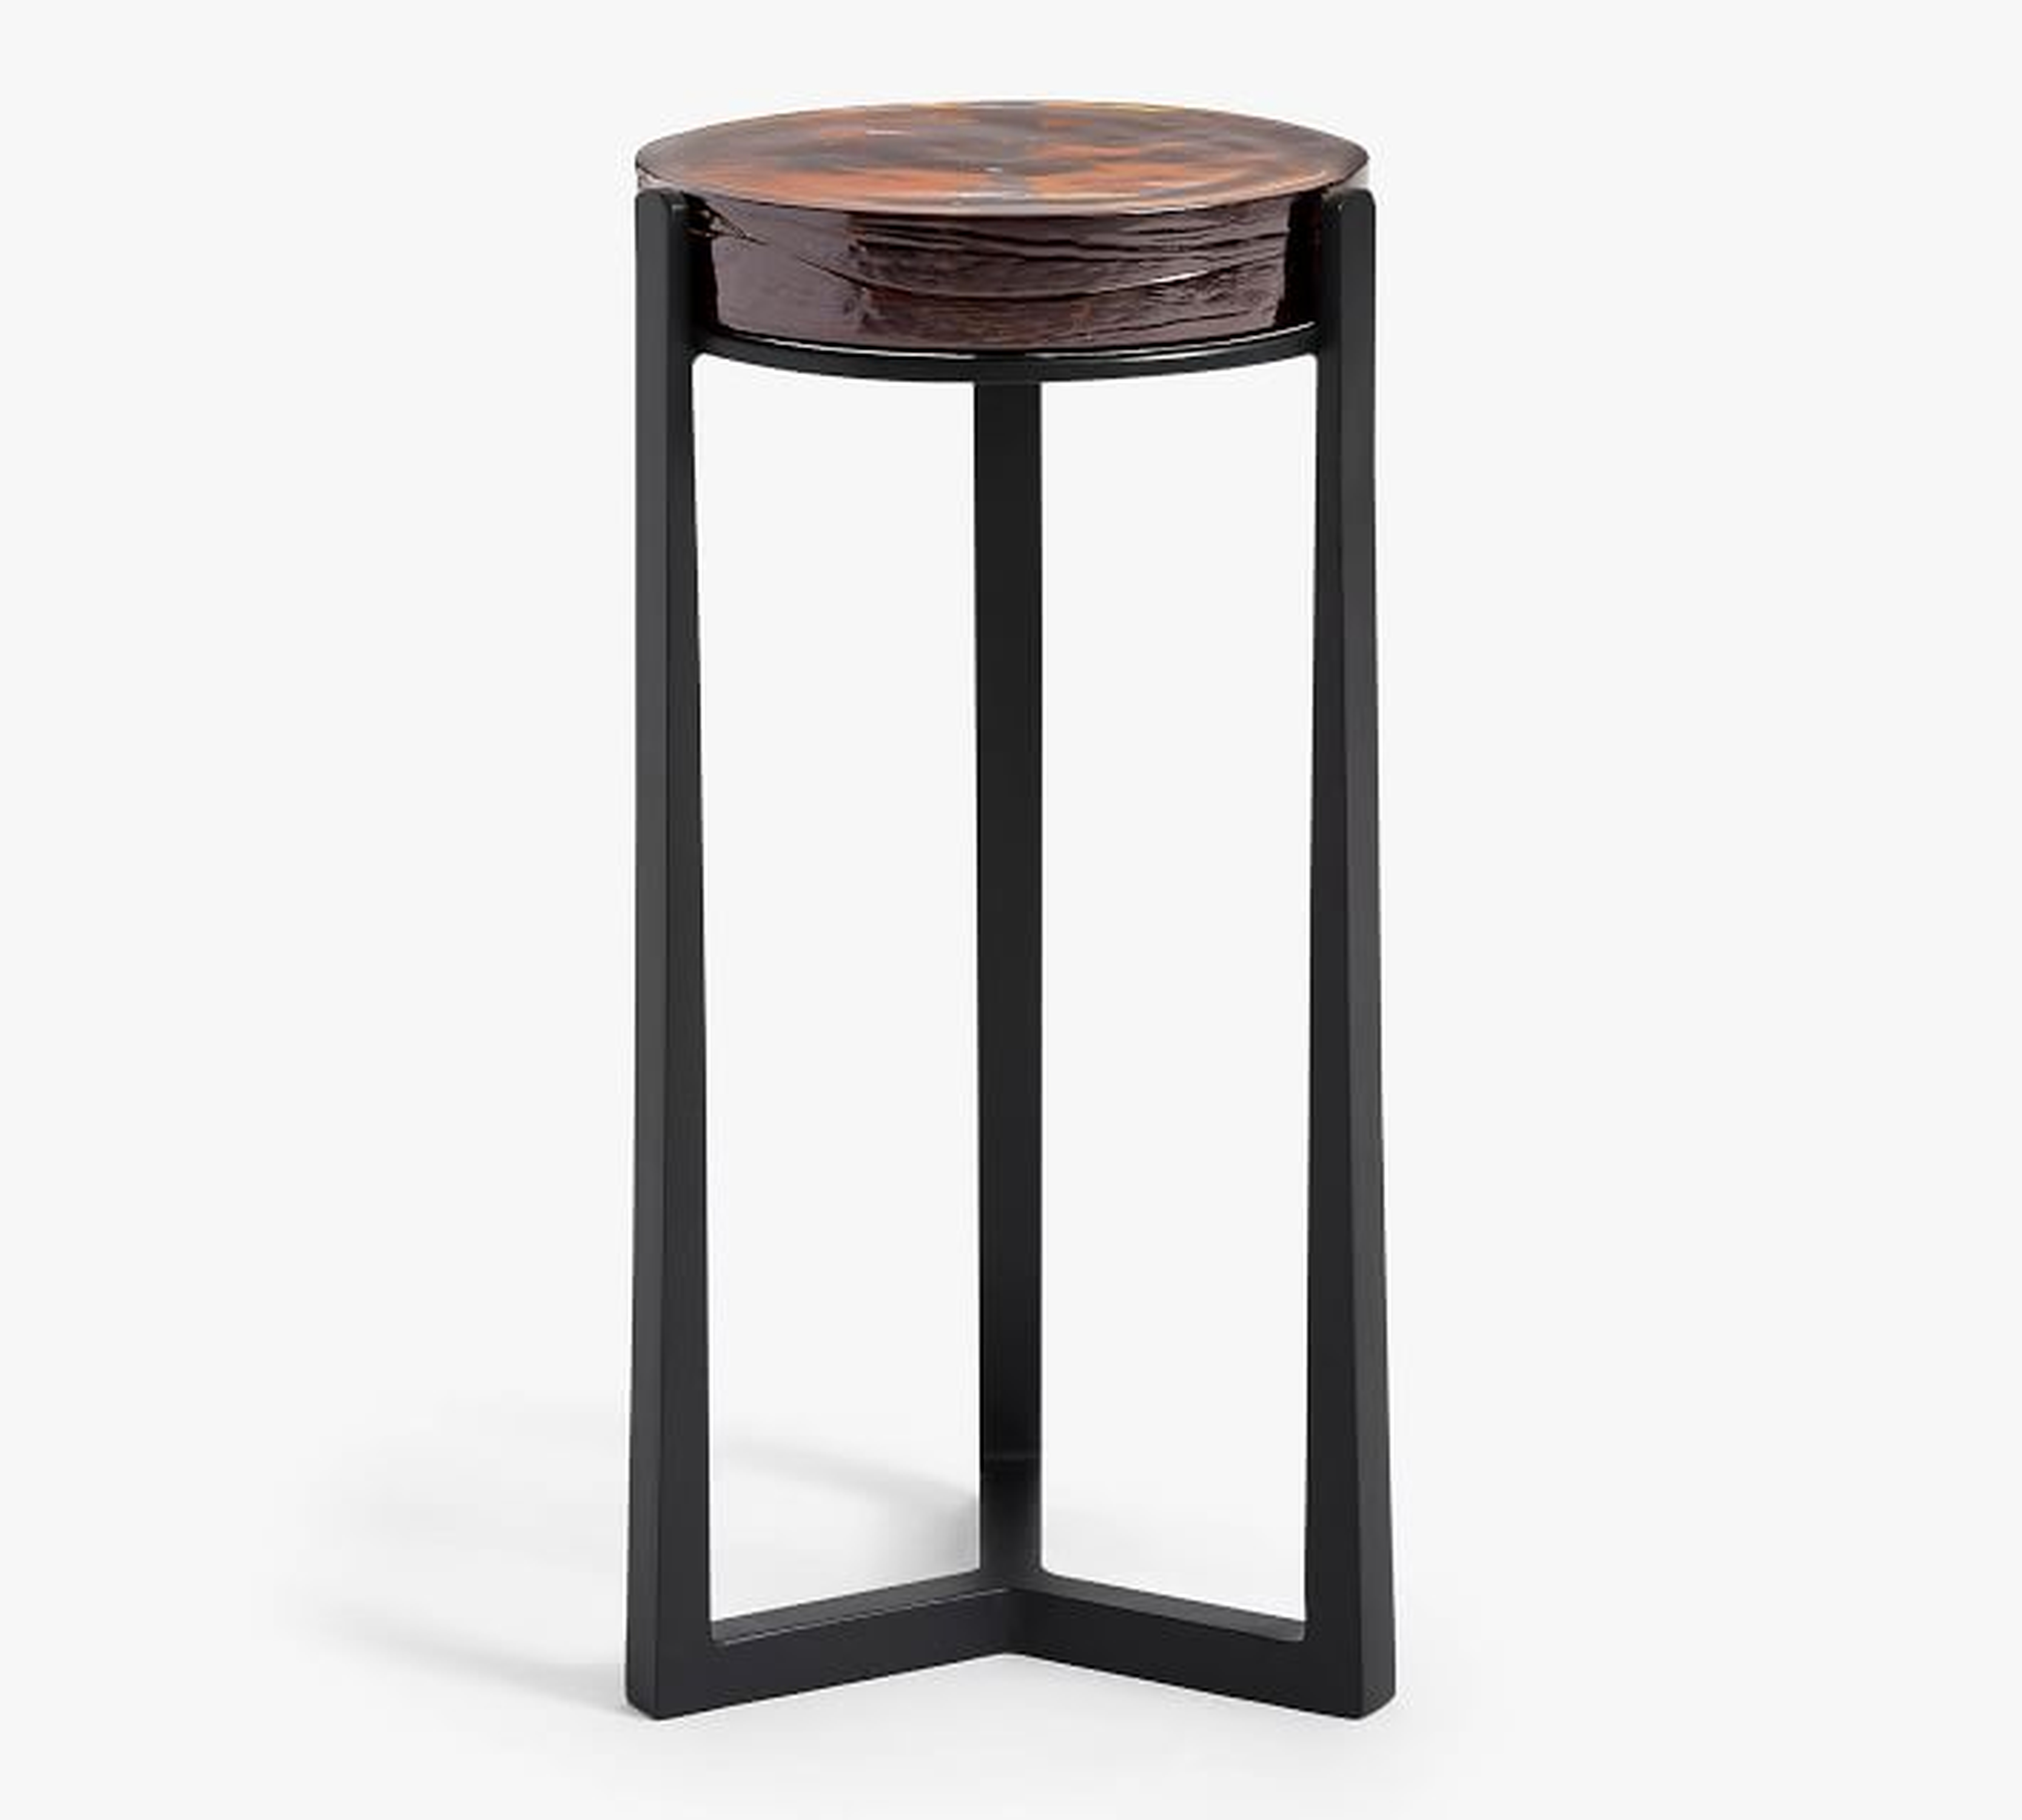 Cori 10" Round Accent Table, Recycled Amber Glass Top/Black Base - Pottery Barn